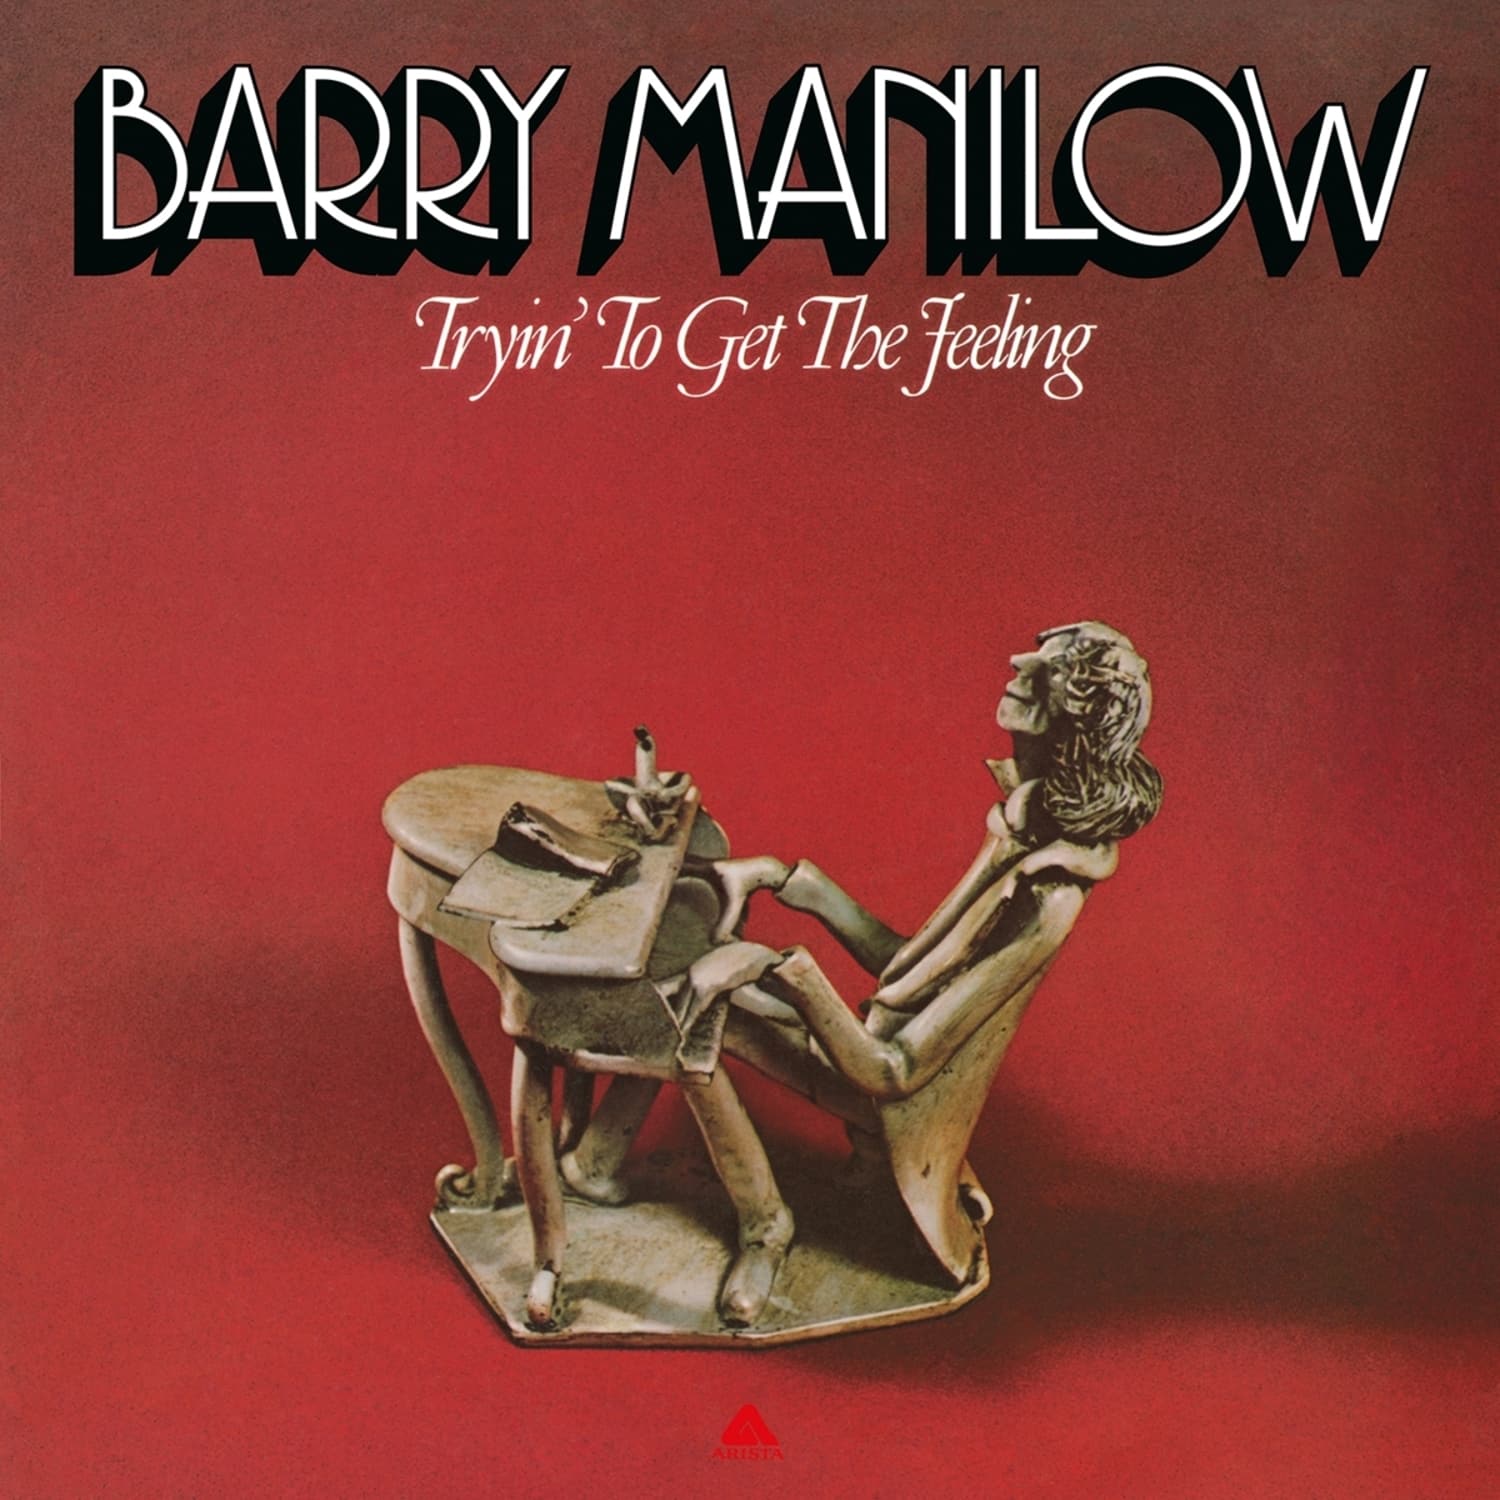  Barry Manilow - TRYIN TO GET THE FEELING 